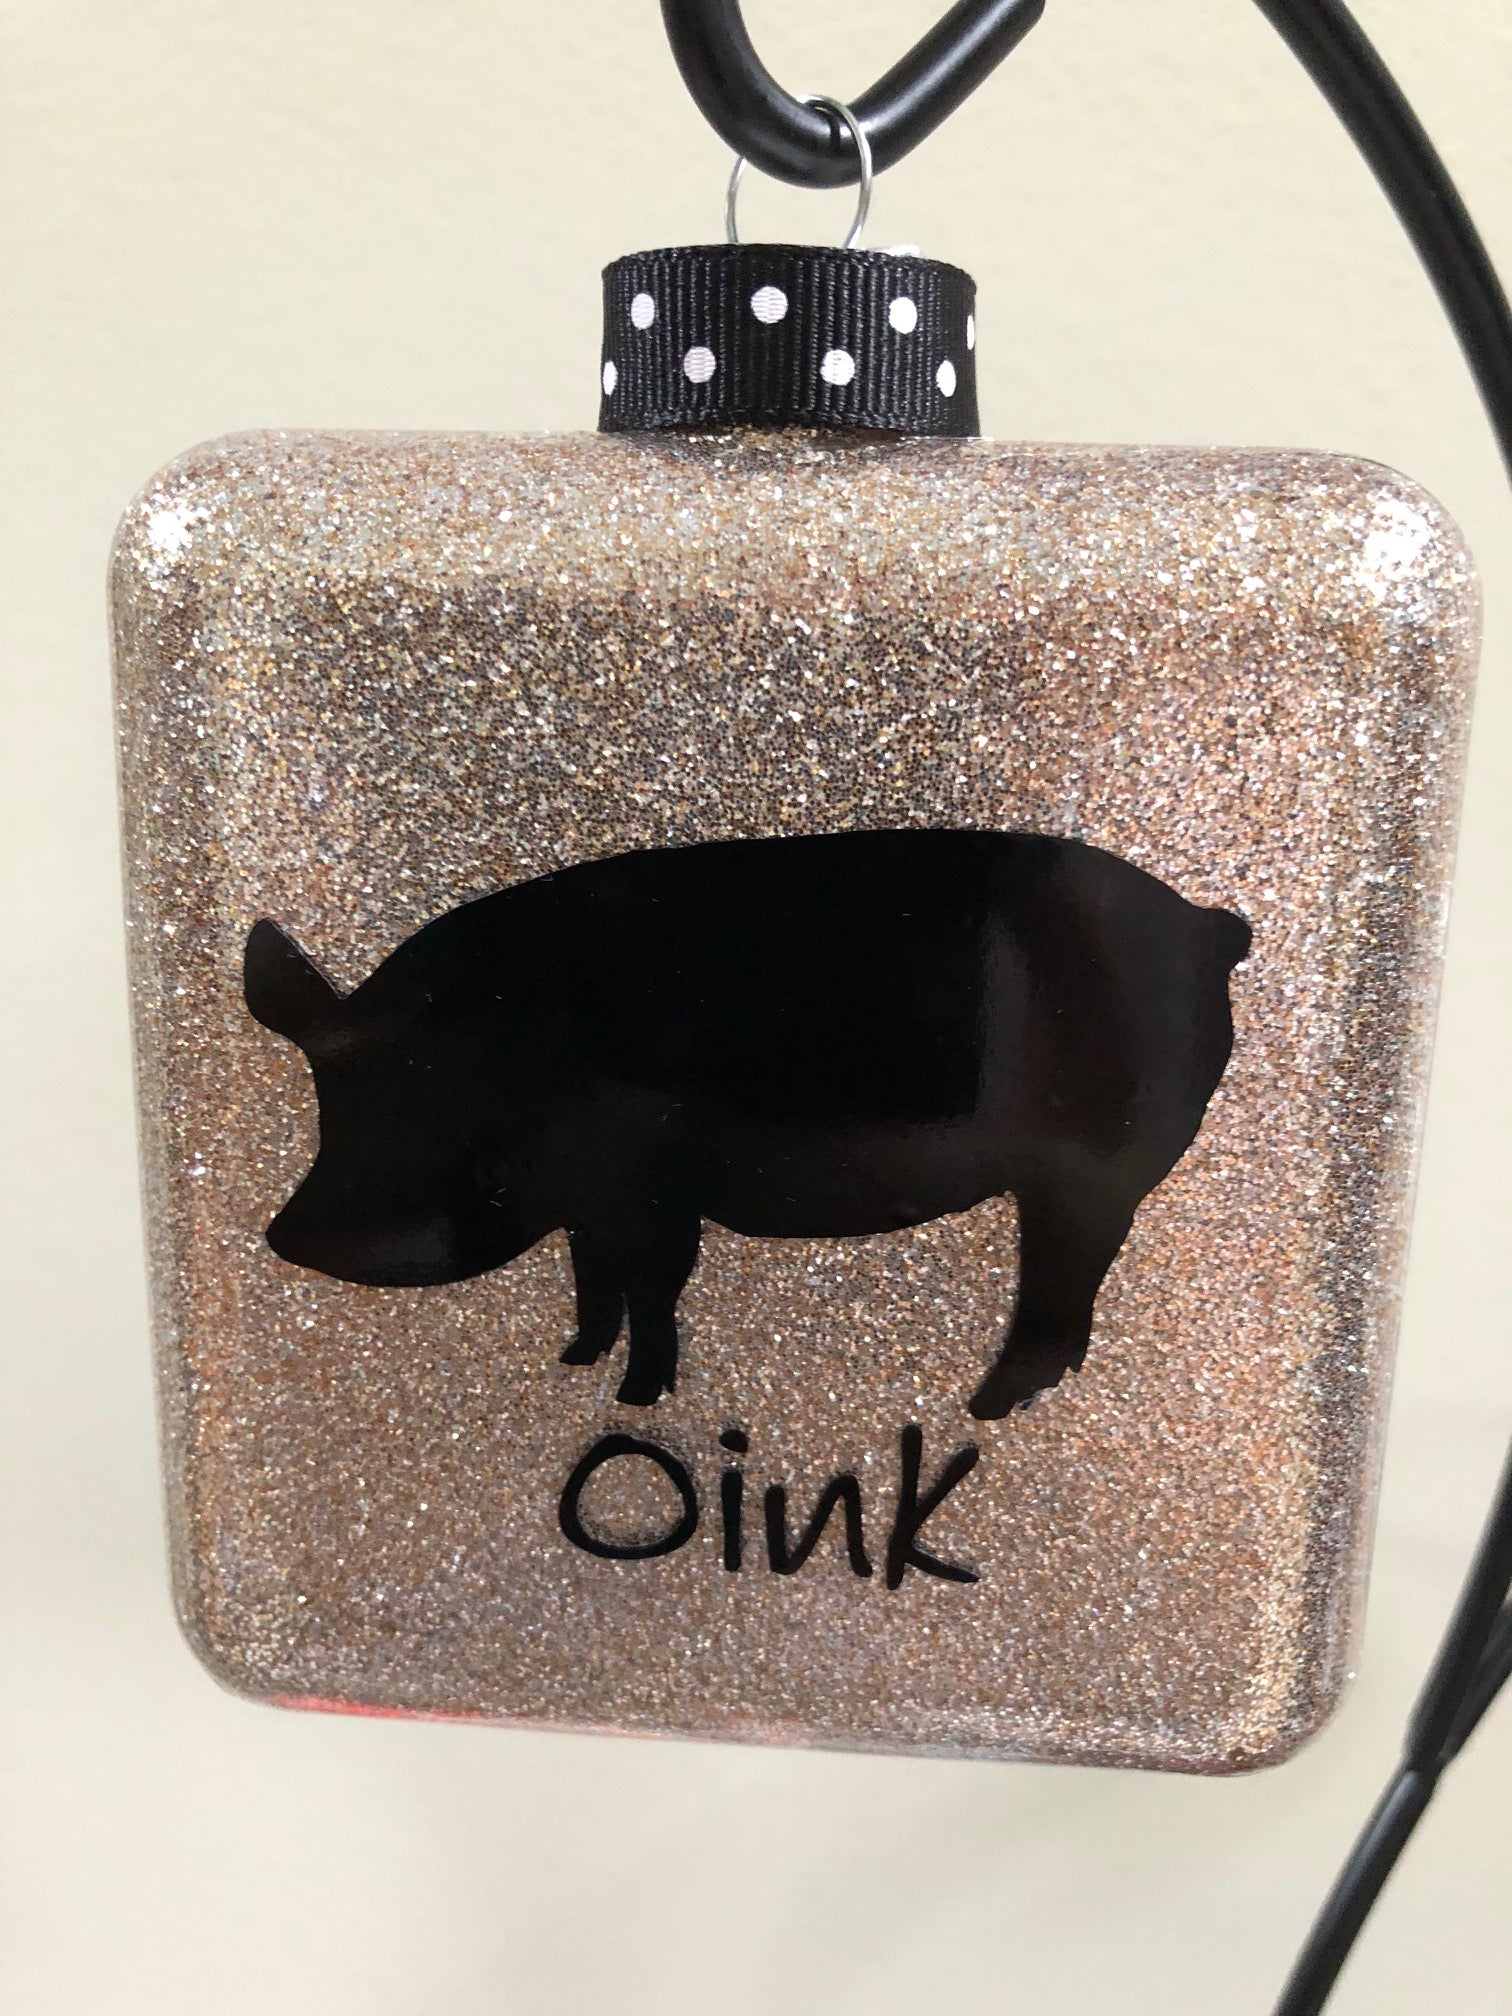 Pig "Oink" Square Ornament